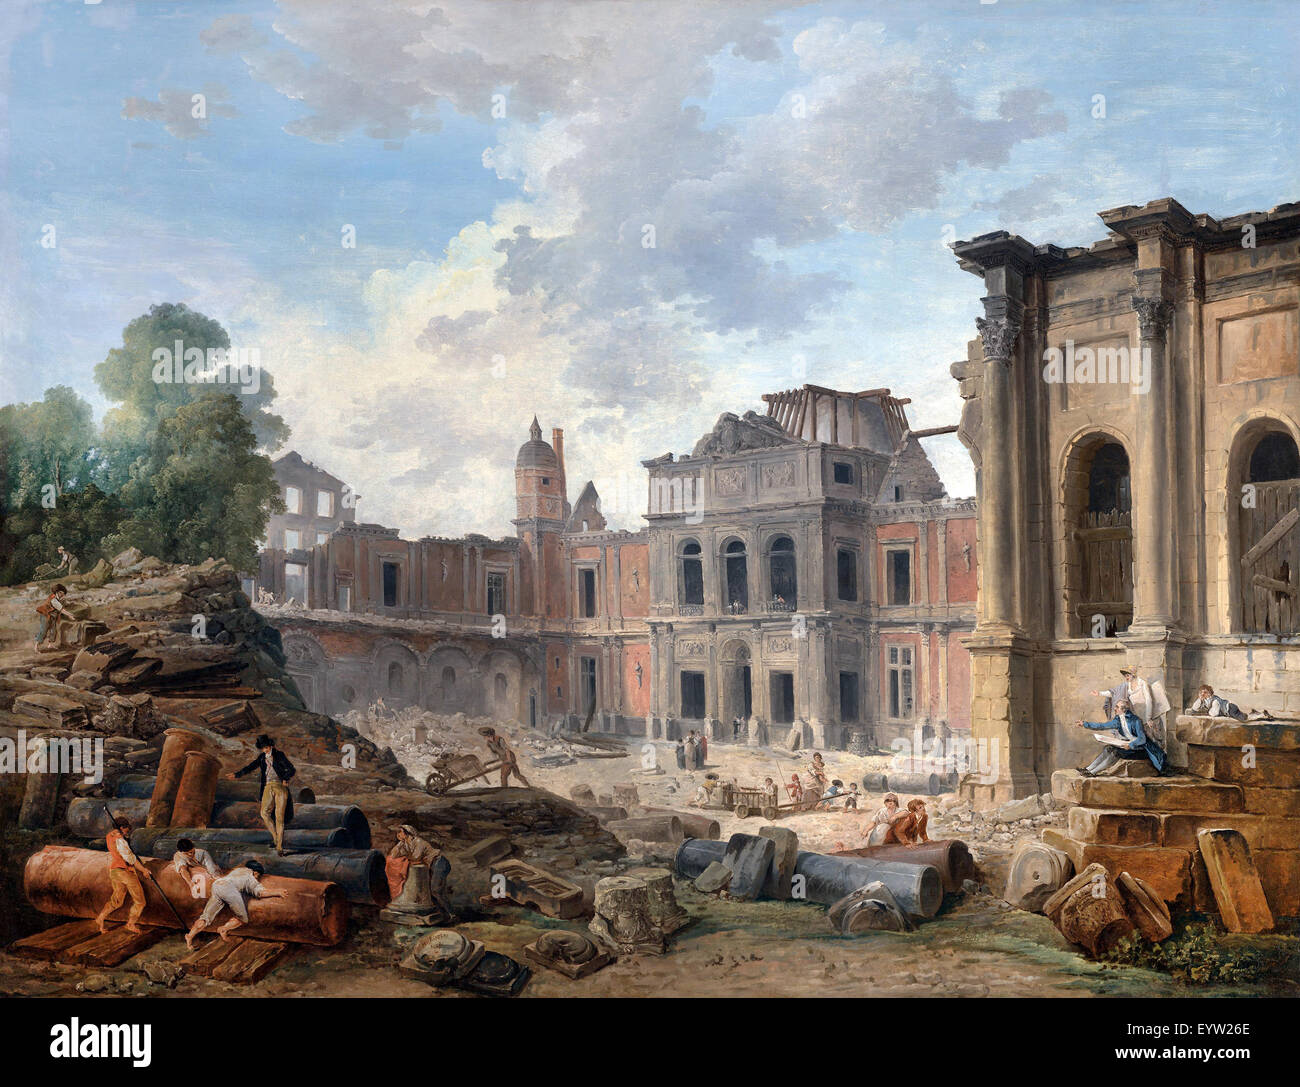 Hubert Robert, Demolition of the Chateau of Meudon 1806 Oil on canvas. The J. Paul Getty Museum, Los Angeles, USA. Stock Photo